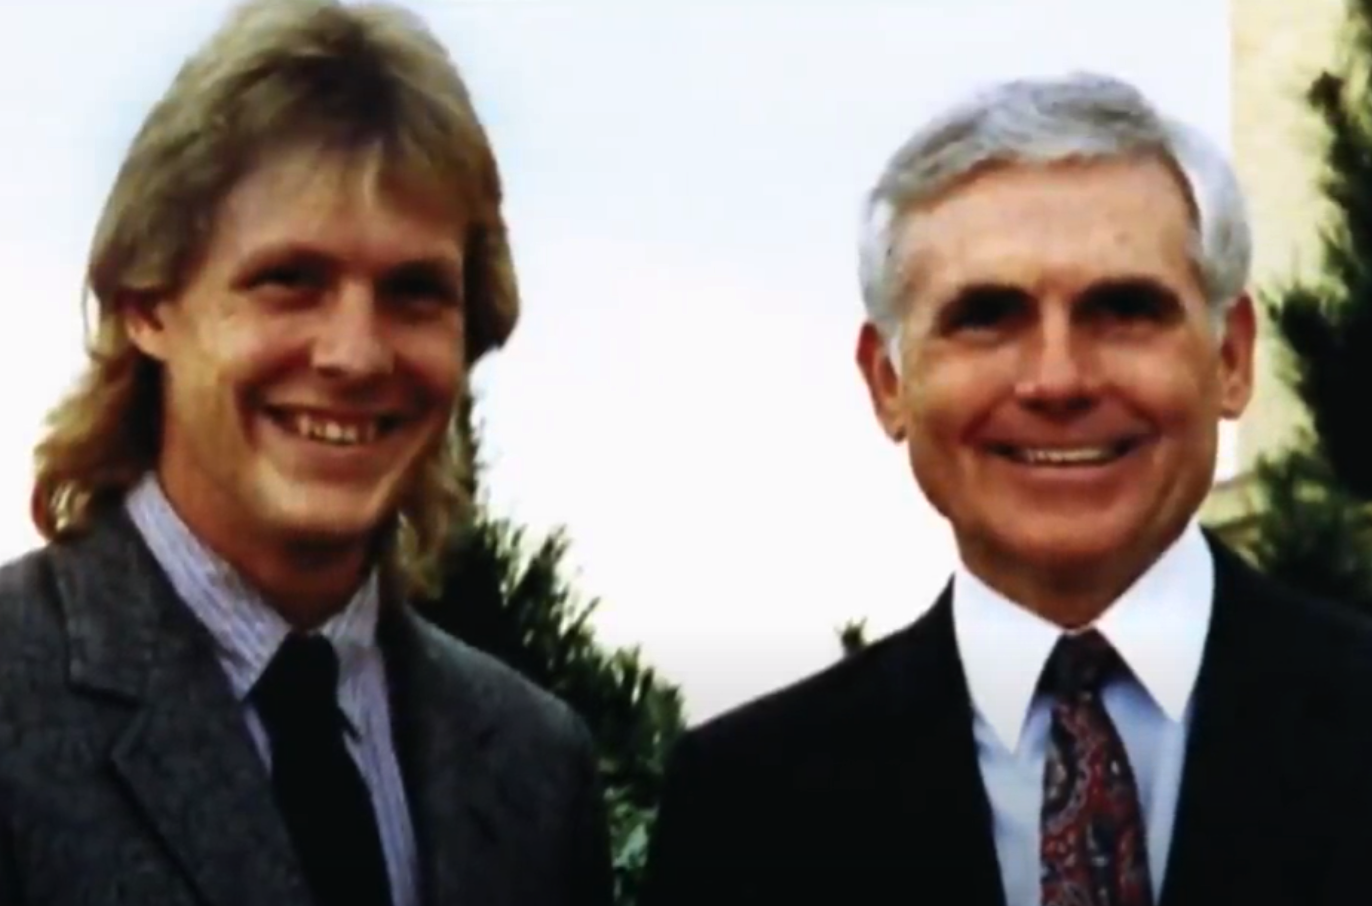 Scott and Jim Dunn pictured together, both smiling